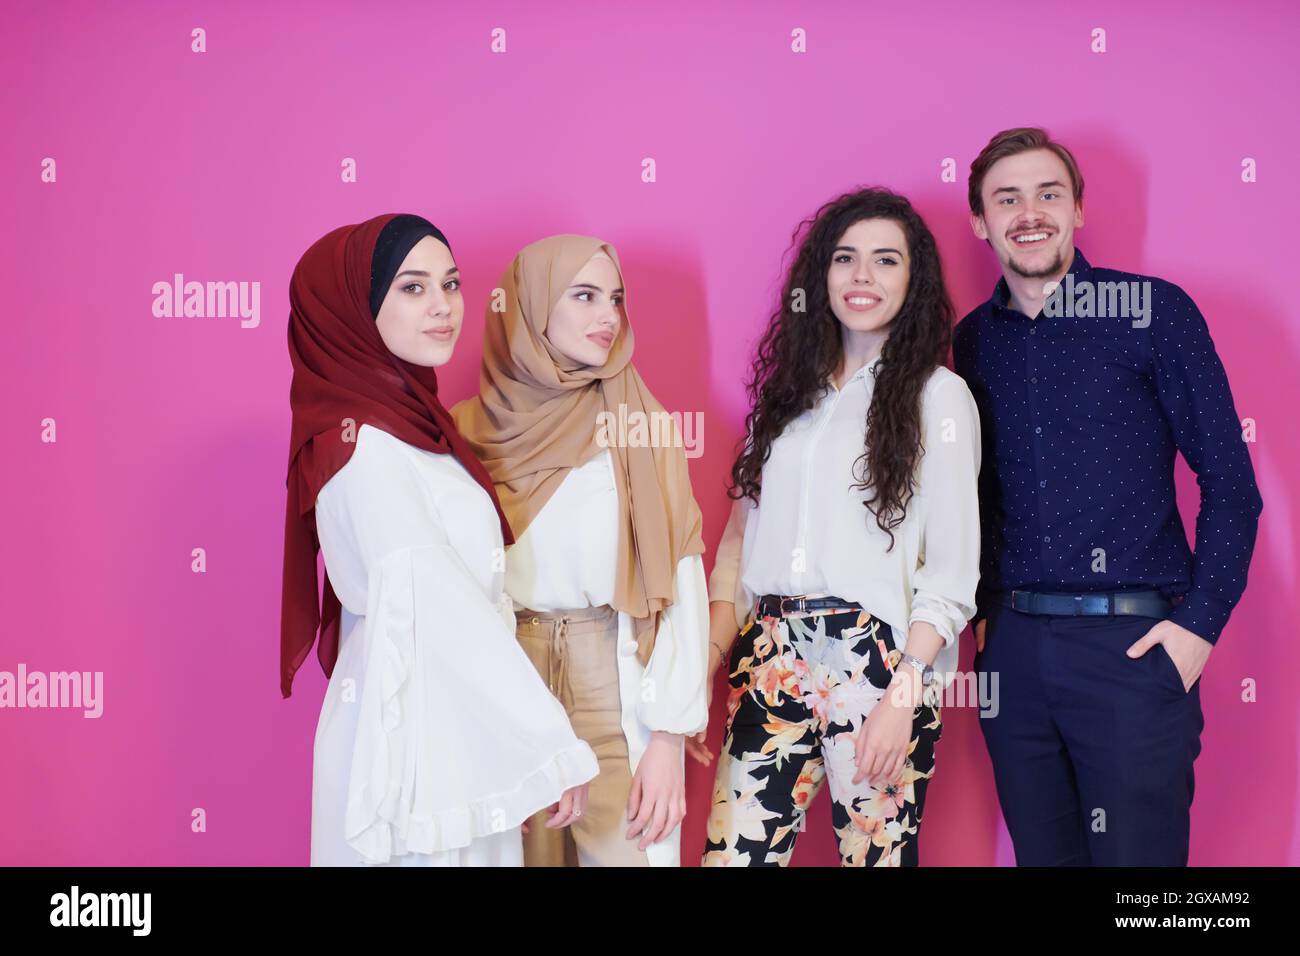 group portrait of young muslim people two of them in fashionable dress with hijab isolated on pink background representing modern islam fashion and ra Stock Photo